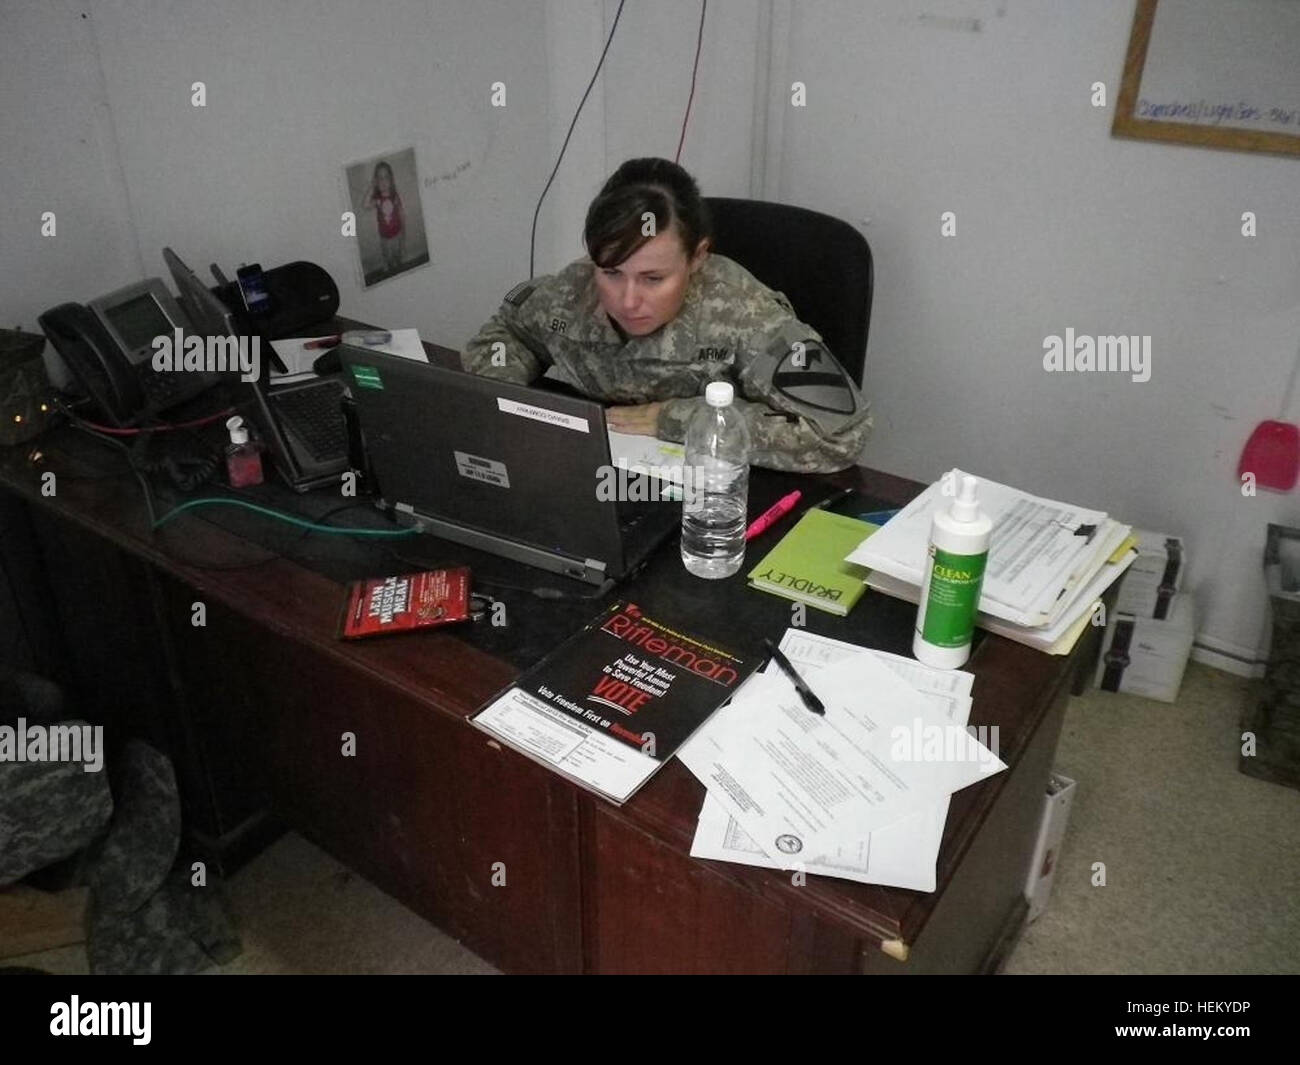 First Lt. Tiffany Bradley, B FMC, 215th Brigade Support Battalion, 3rd Advise and Assist Brigade, 1st Cavalry Division, a native of Columbus, Ga., works at her computer in an effort to get equipment turned in Oct. 24, 2011, at Contingency Operating Base Adder, Iraq. (Photo by: 2nd Lt. Samuel Eldridge, B FMC, 215th BSB, 3rd AAB, 1st Cavalry Division) Maintenance company prepares for redeployment 484855 Stock Photo